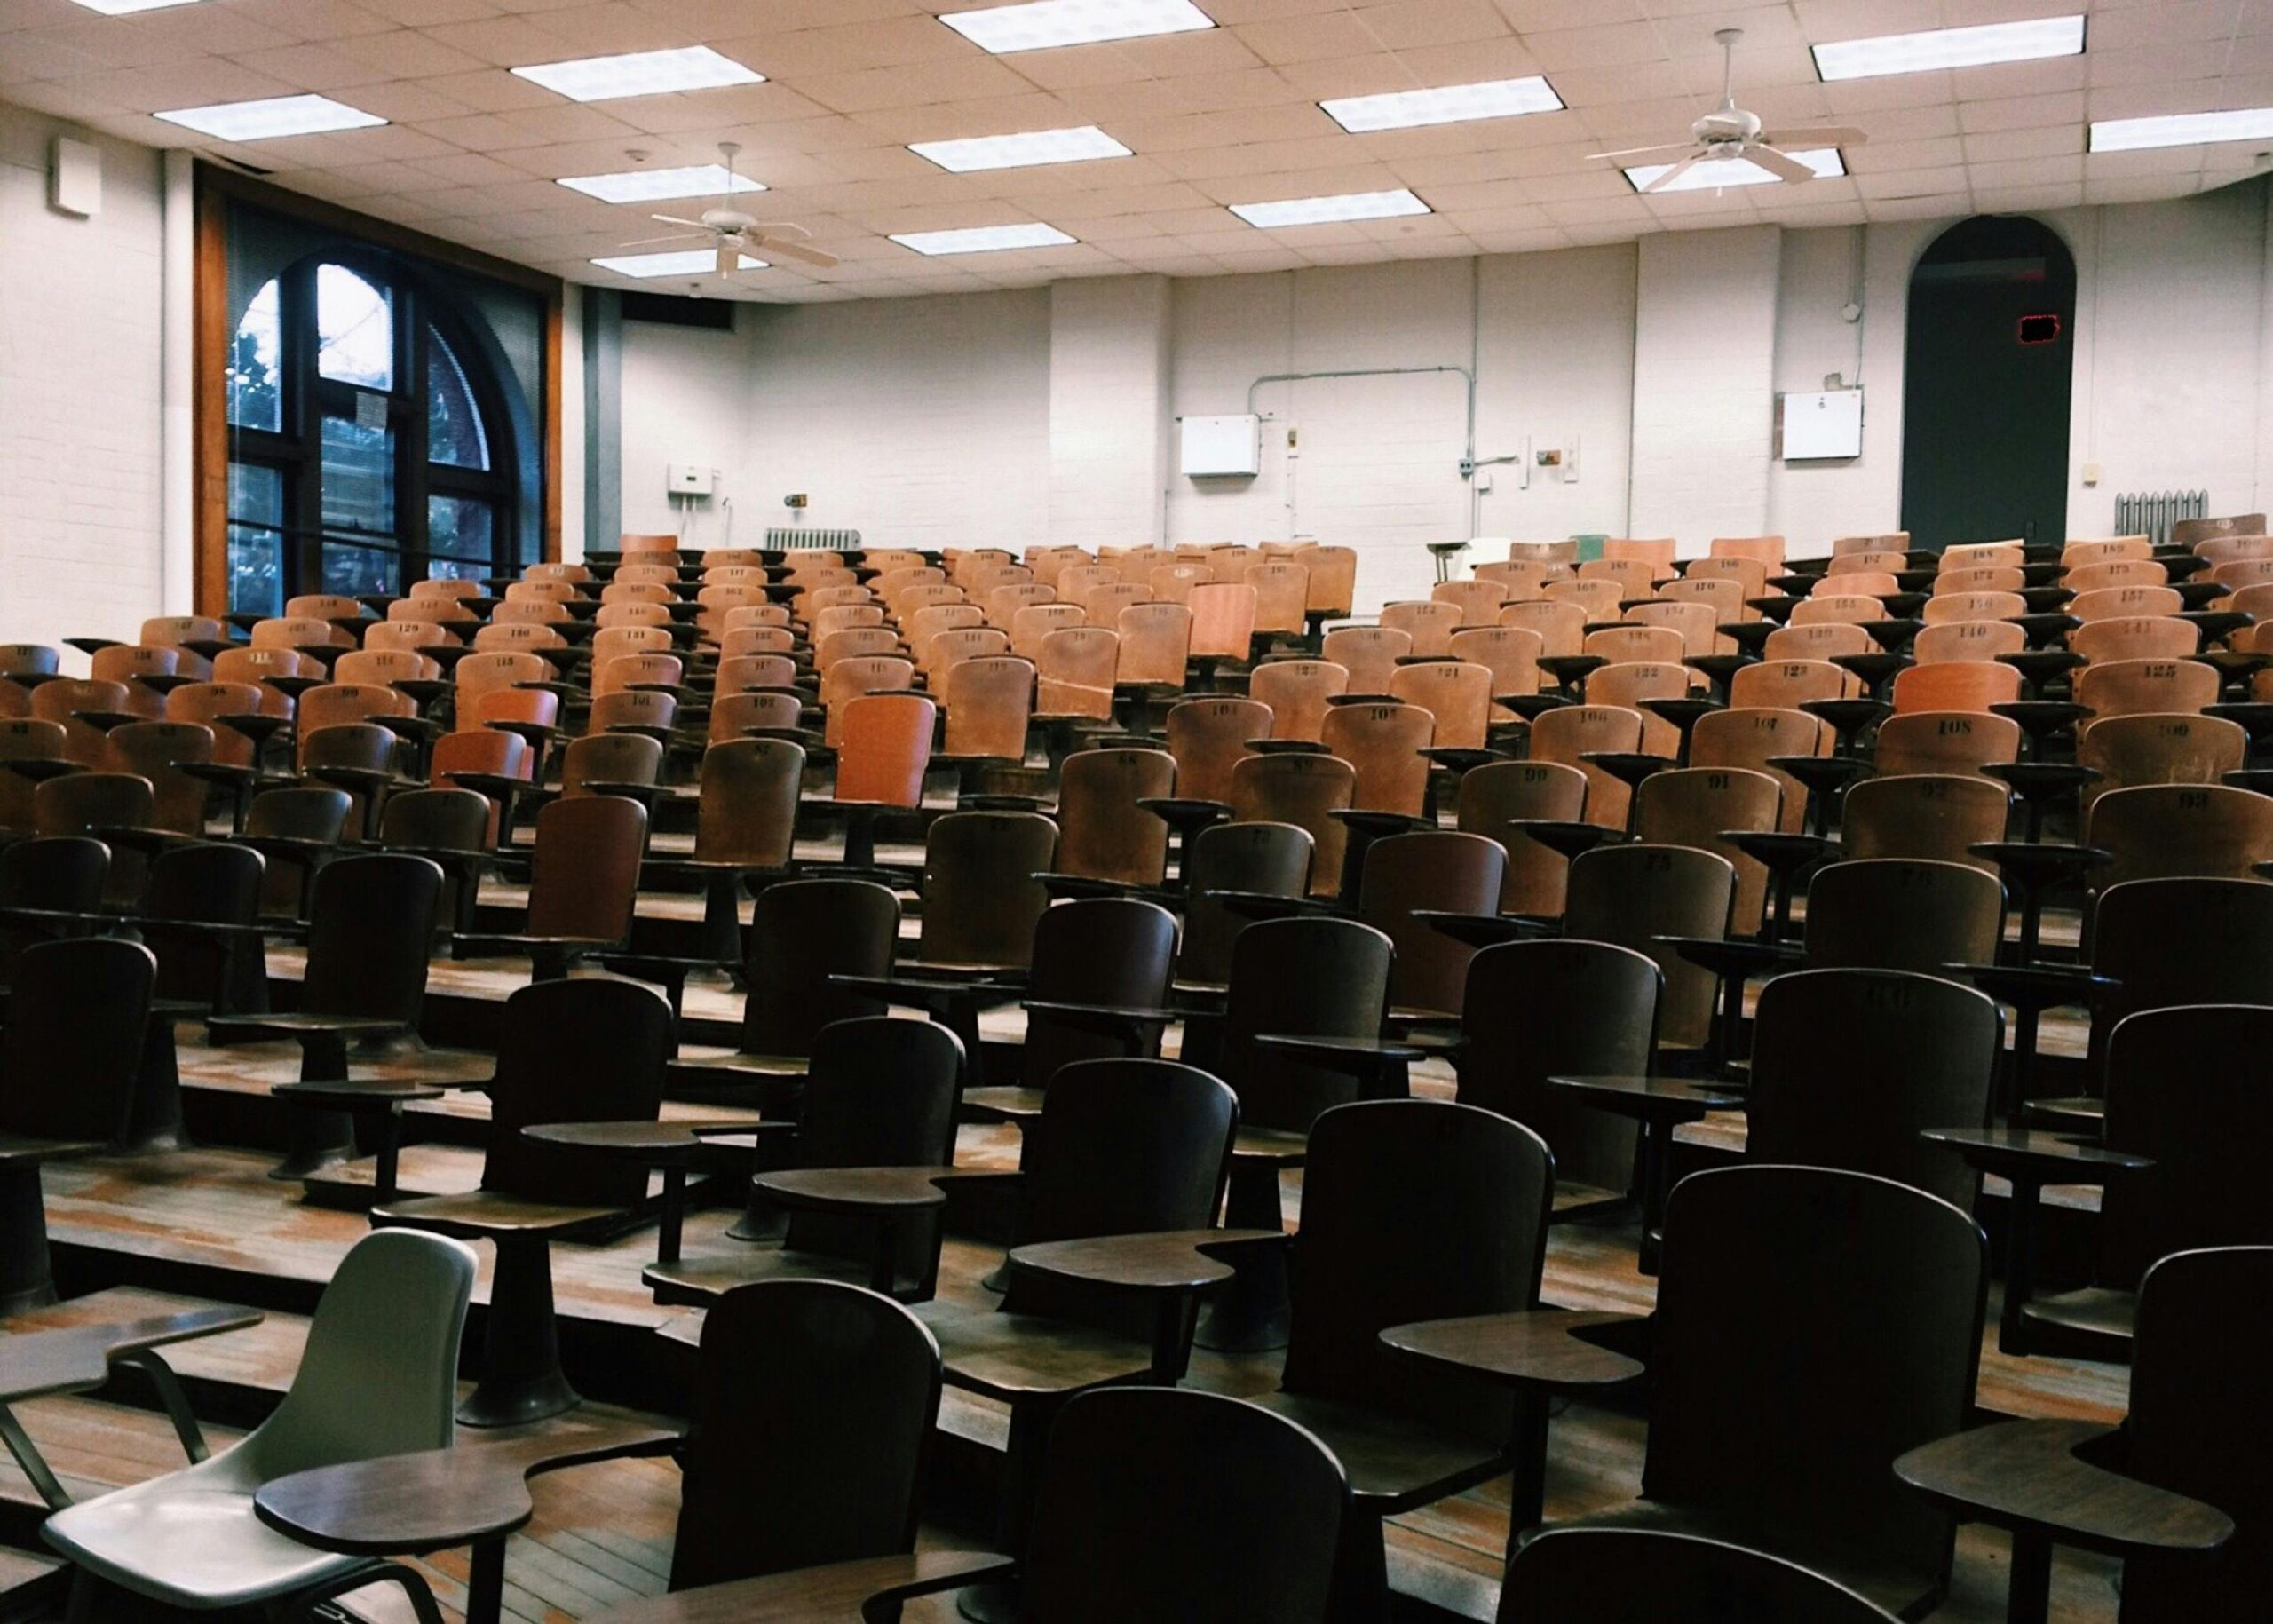 Empty university lecture hall full of desks.